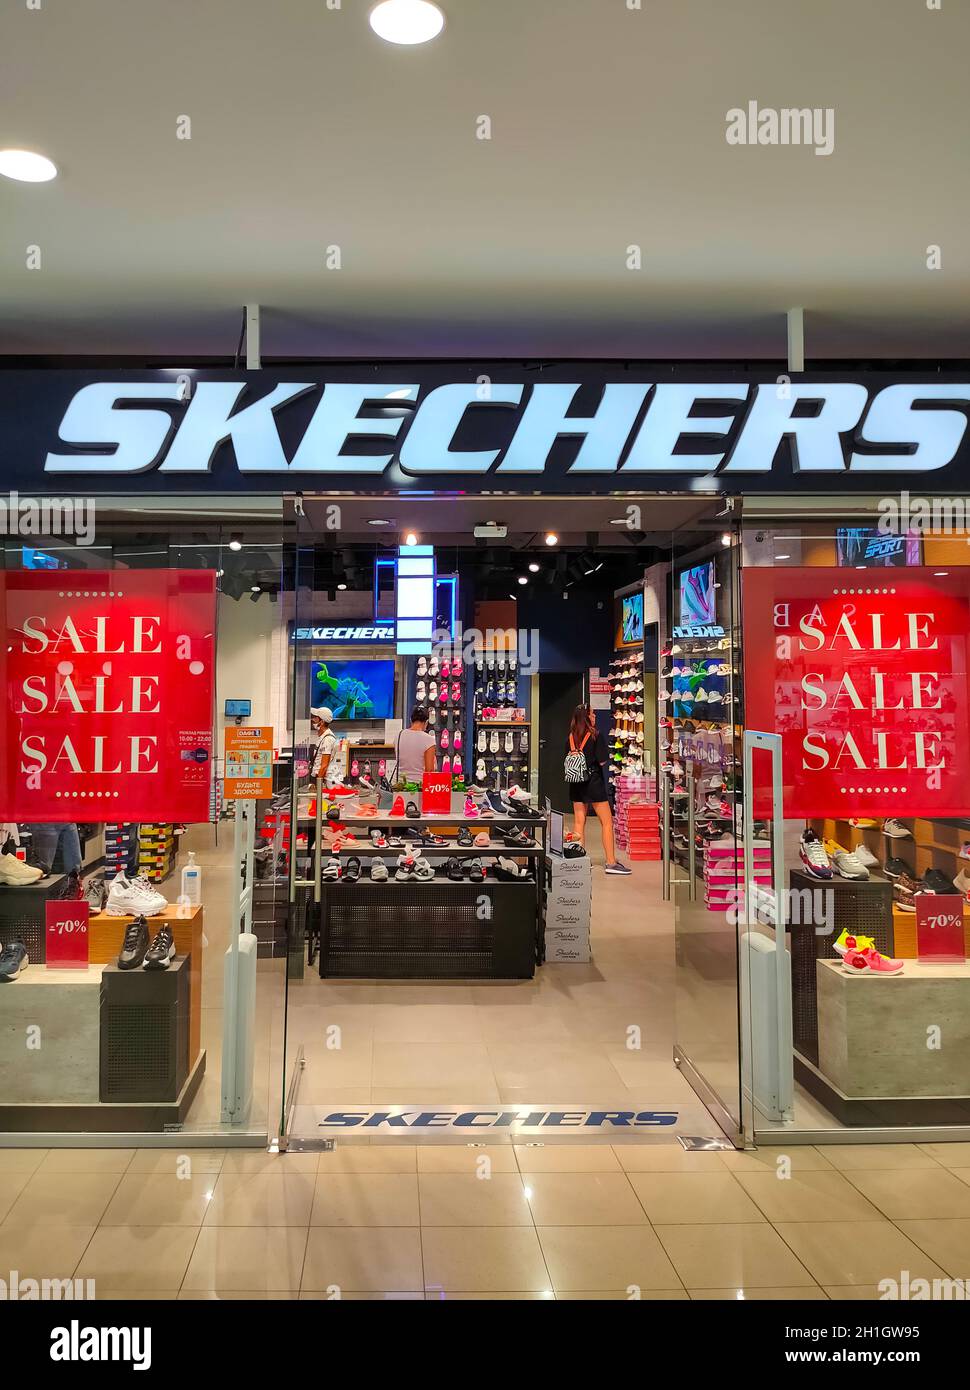 Skechers Outlet High Resolution Stock Photography and Images - Alamy